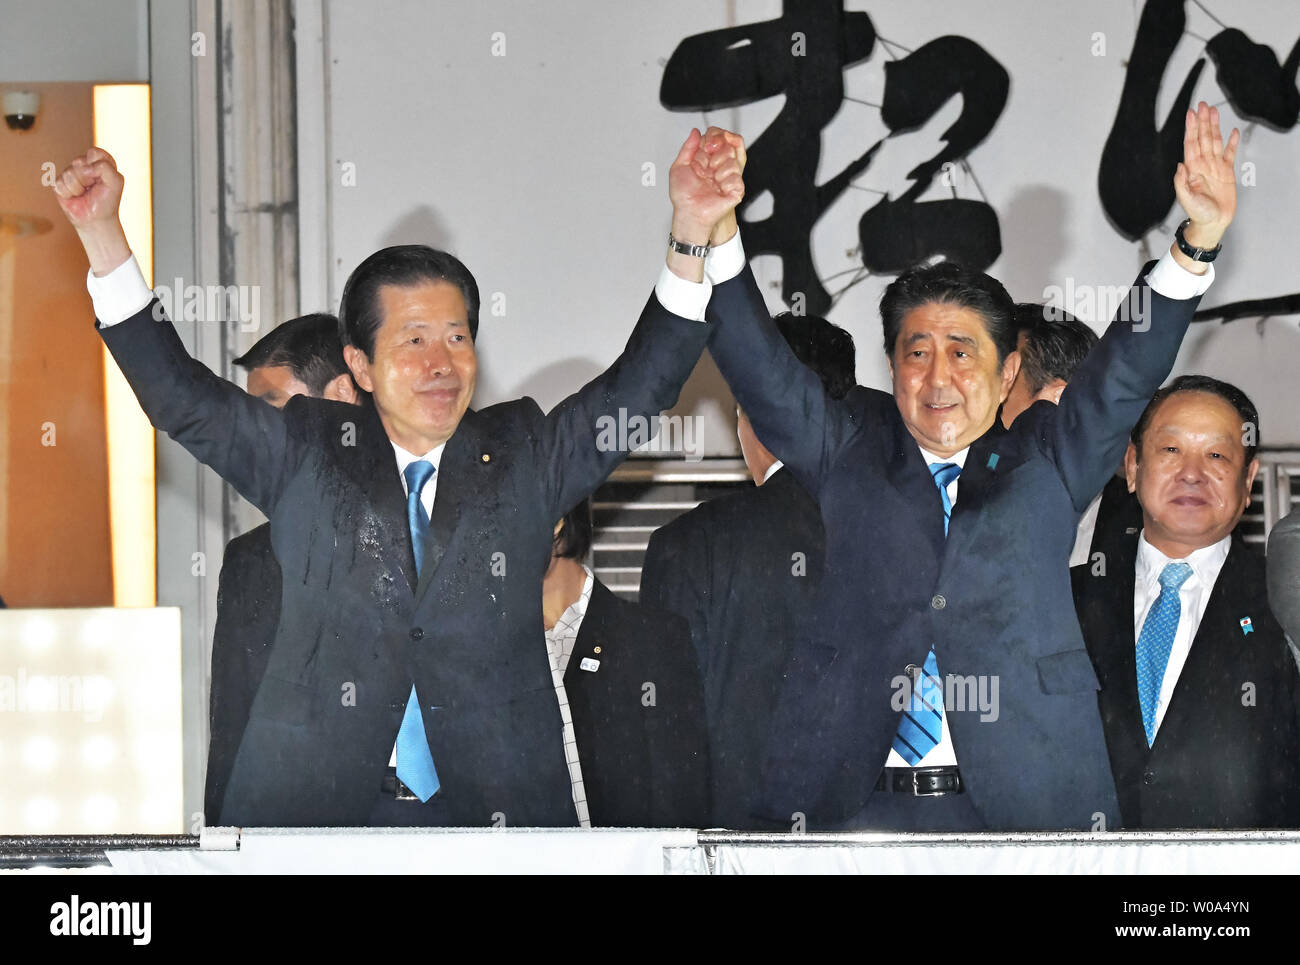 Japan's Prime Minister Shinzo Abe raises his fists with coalition Komeito Party leader Natsuo Yamaguchi (L) during the stump speech at Shibuya district in Tokyo, Japan on September 28, 2017.     Photo by Keizo Mori/UPI Stock Photo